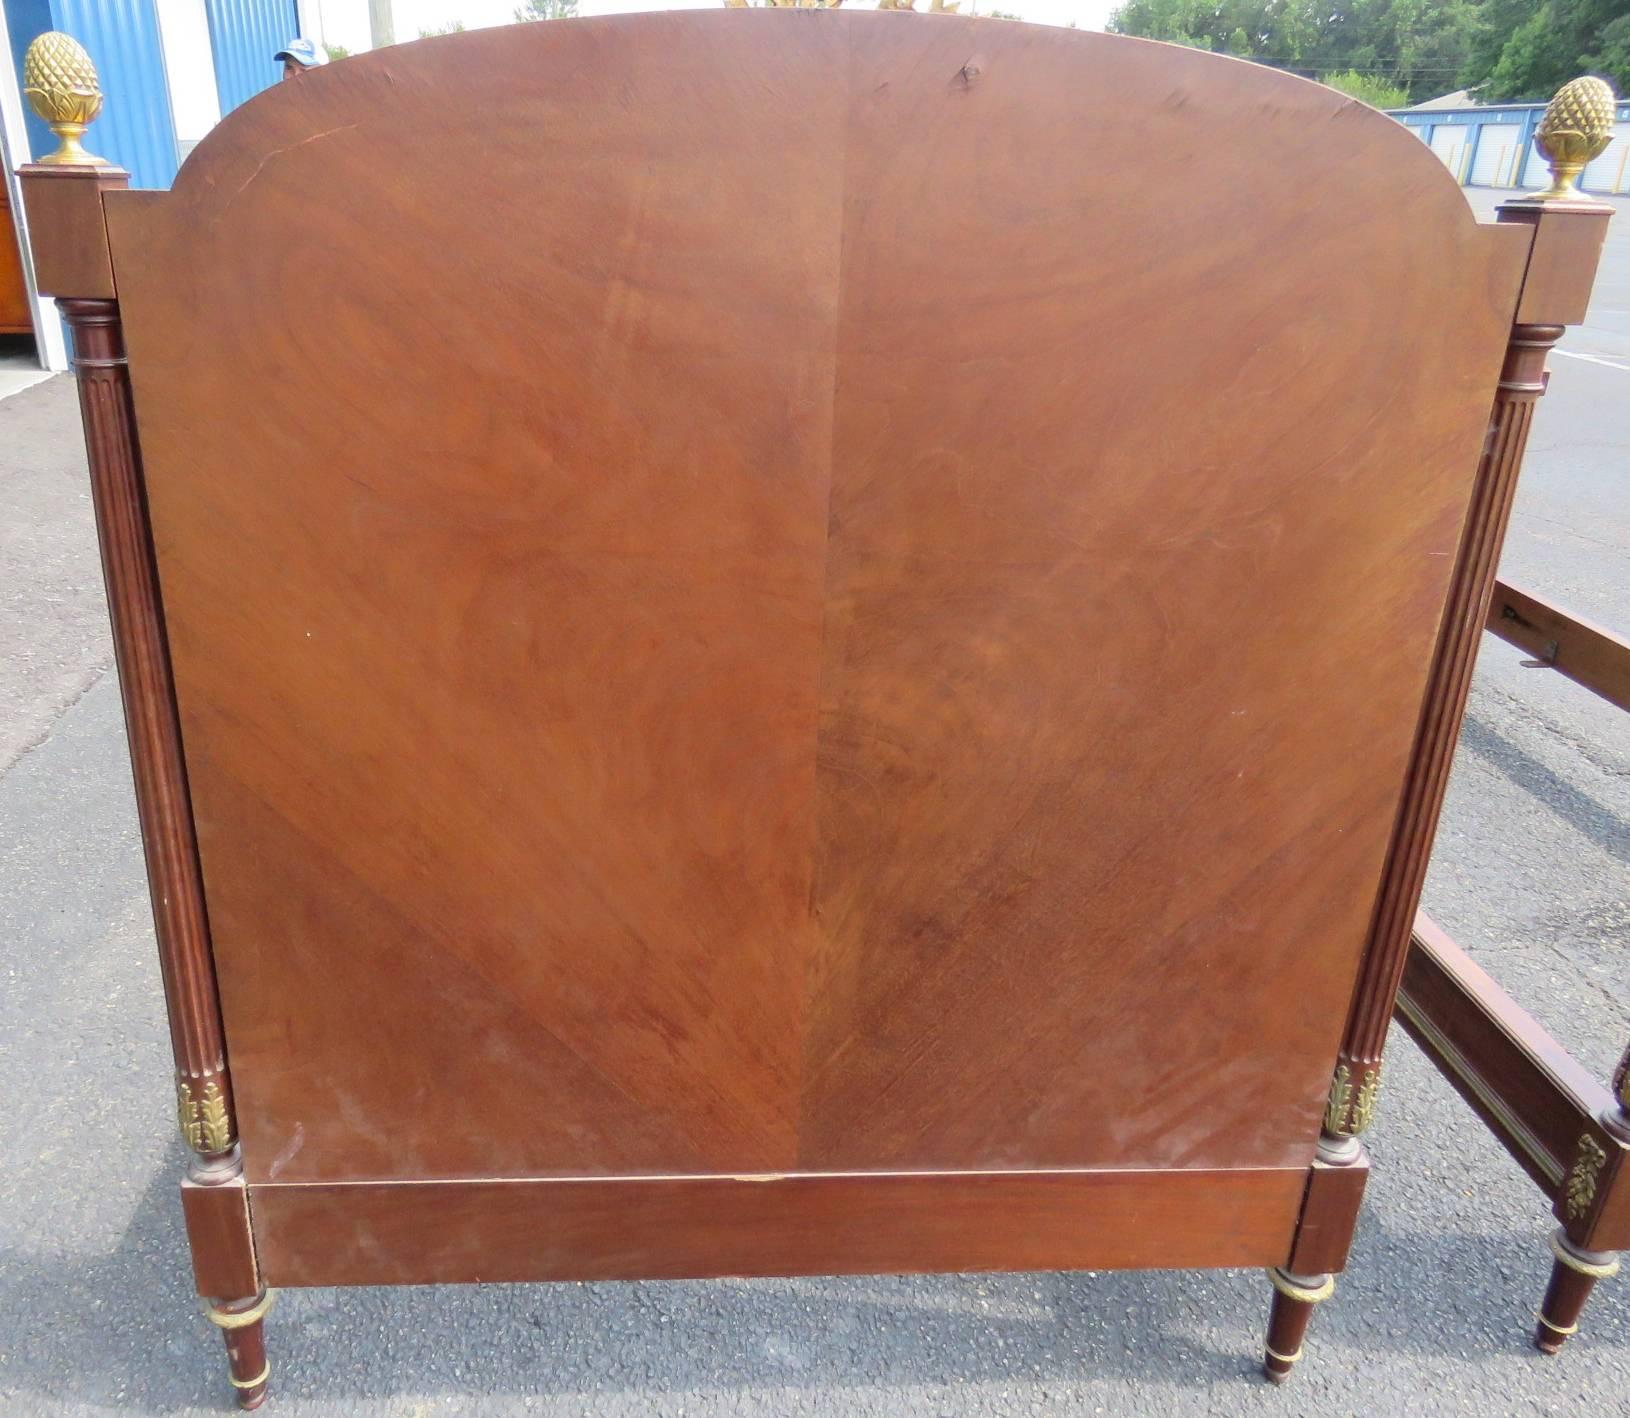 Bronze mounts. Marquetry inlay. Includes headboard, footboard and rails.